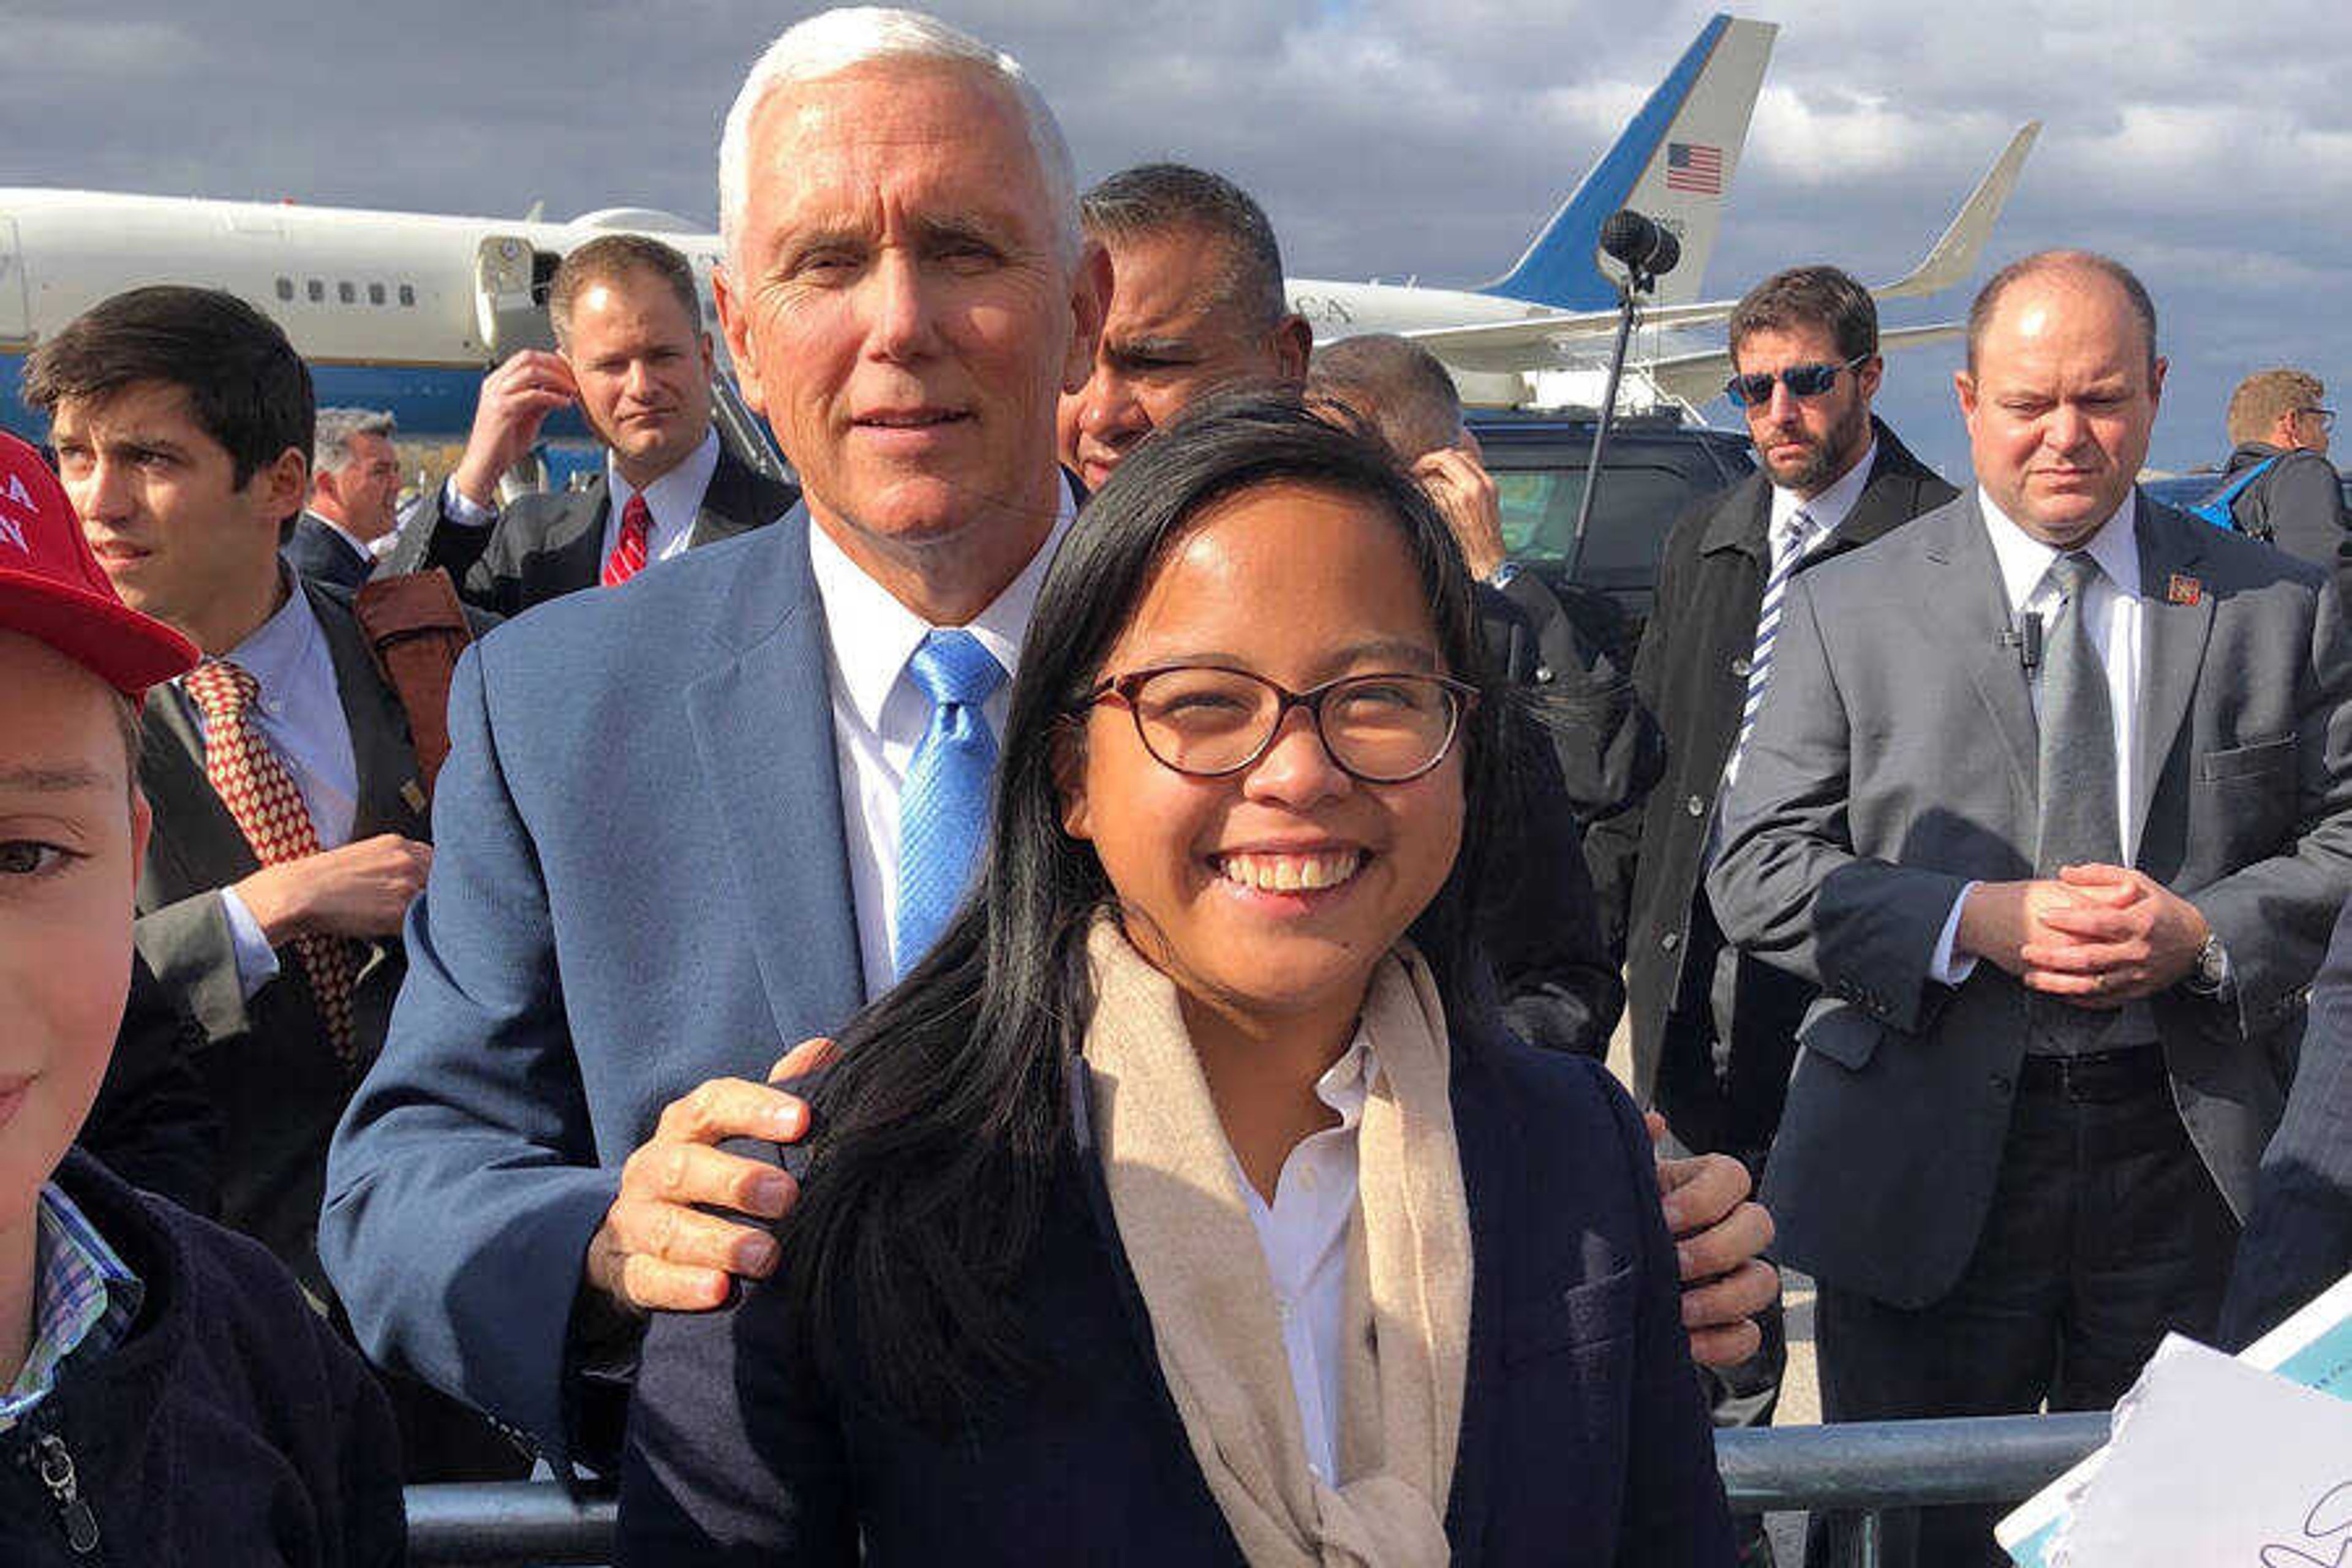 Jacqueline Neil with Vice President Mike Pence in 2018 in front of Air Force 2. She was part of his advance team for his visit to Kansas City.